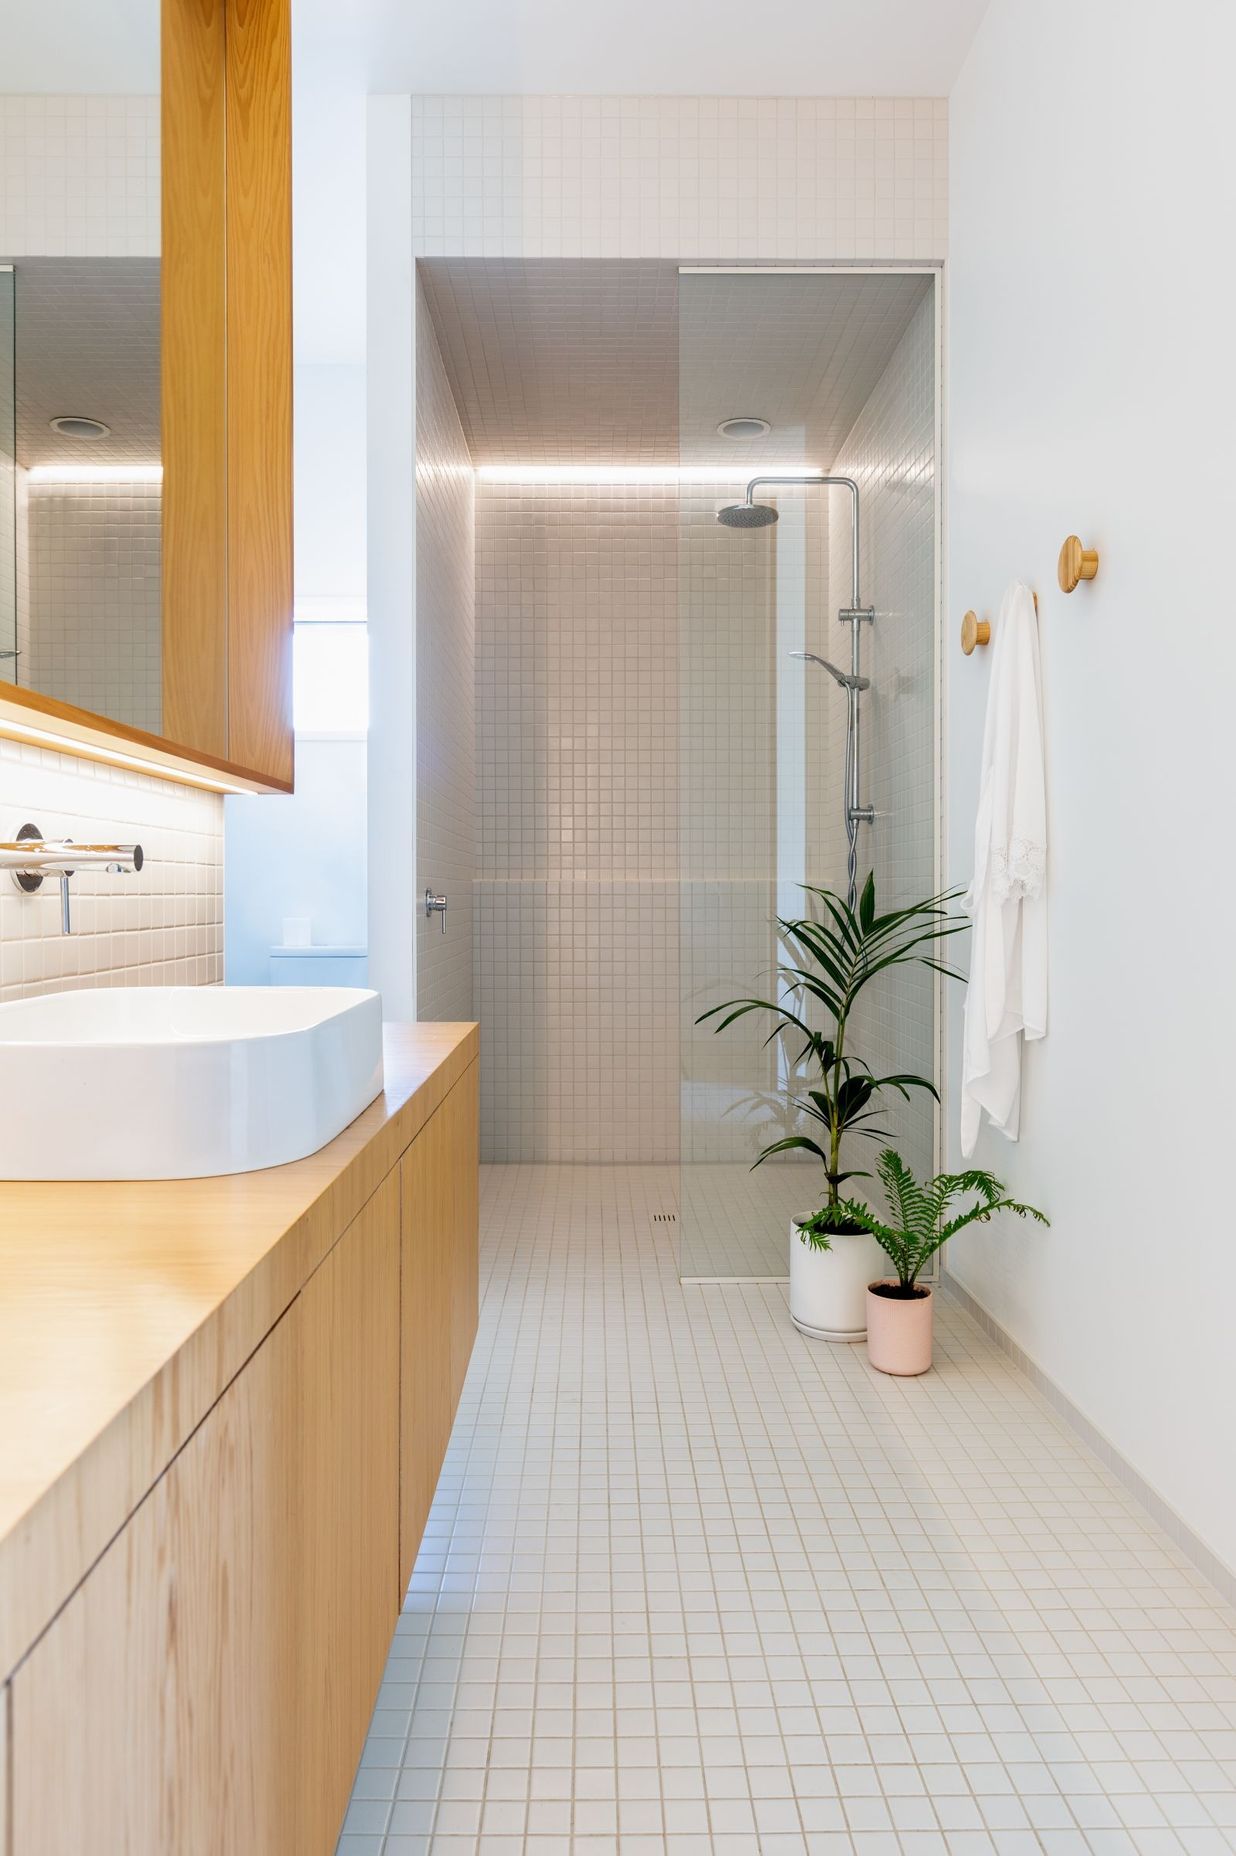 The bathroom is lined with white tiles and wall, to contrast the warm timber cabinetry.